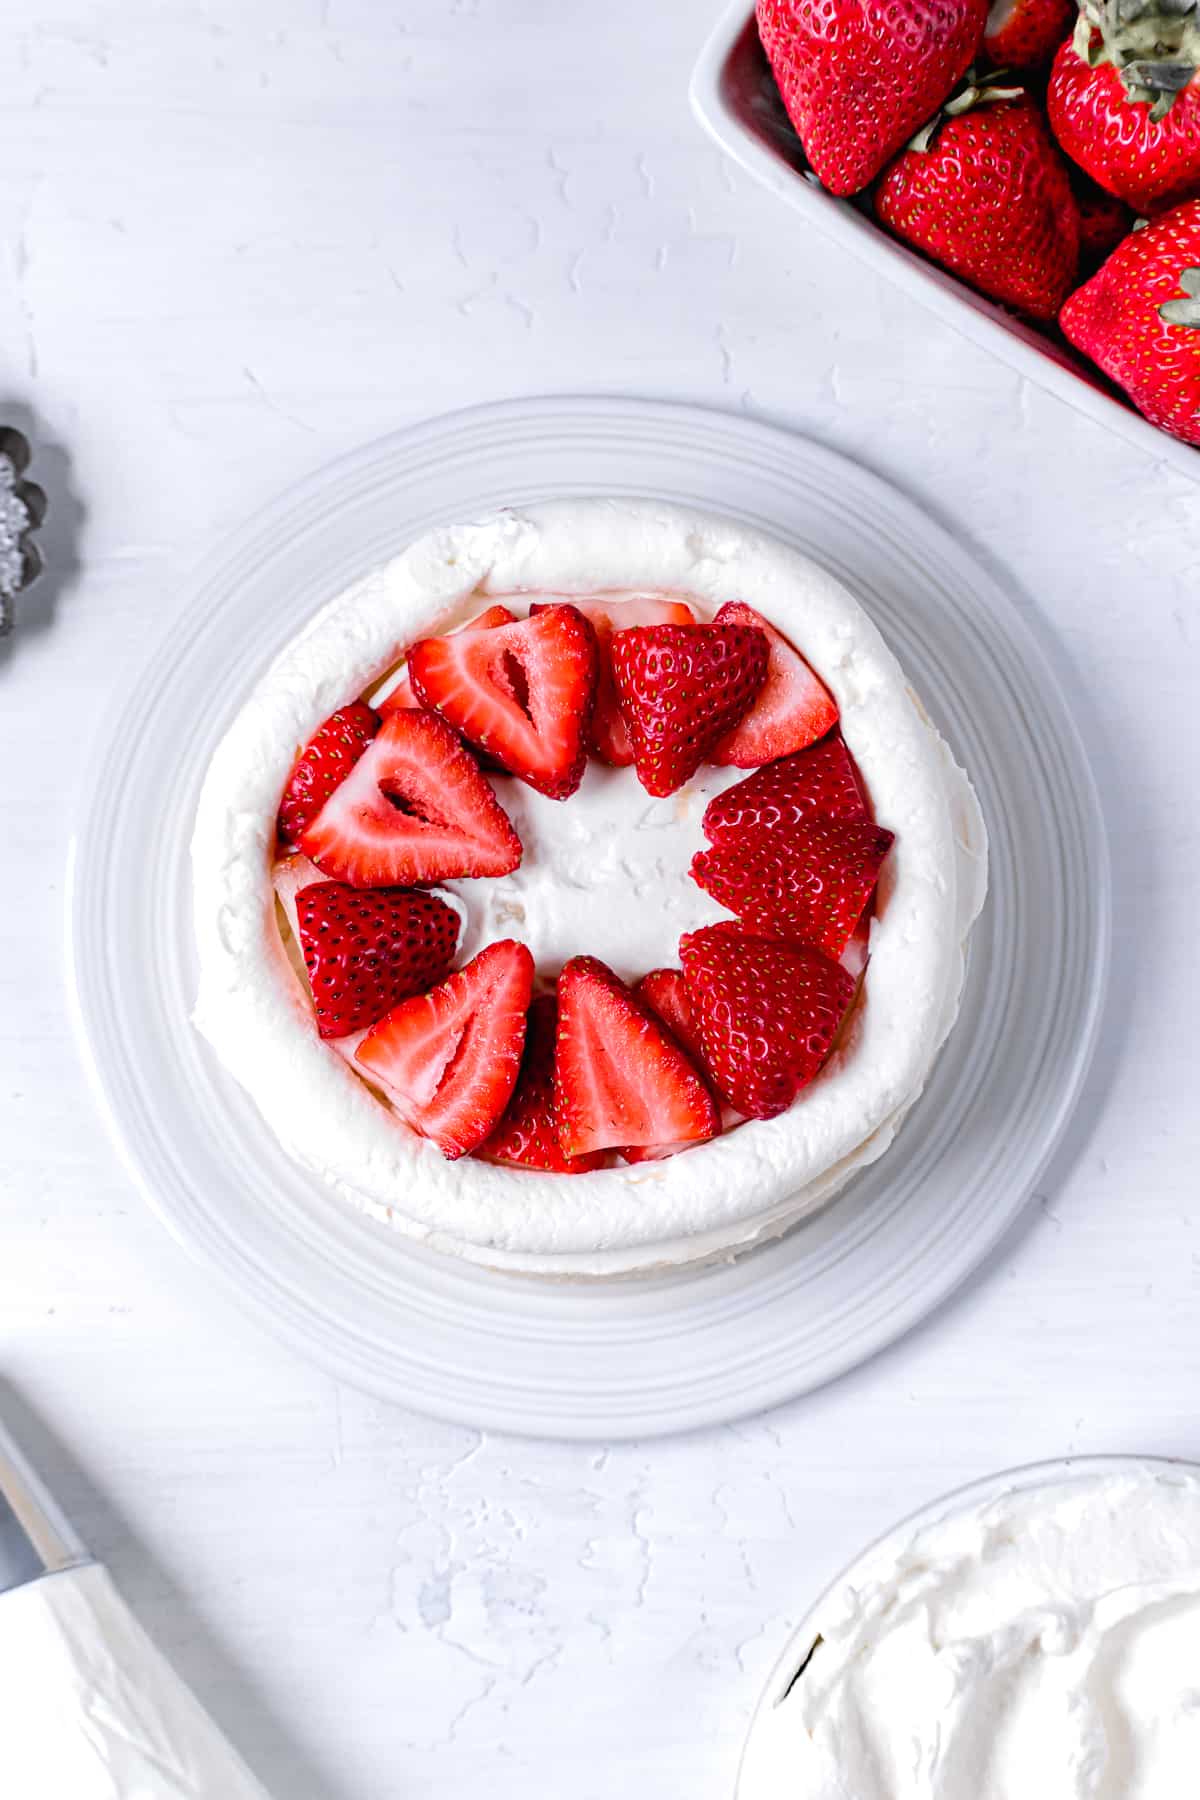 sliced strawberries layered in the middle of the cake.